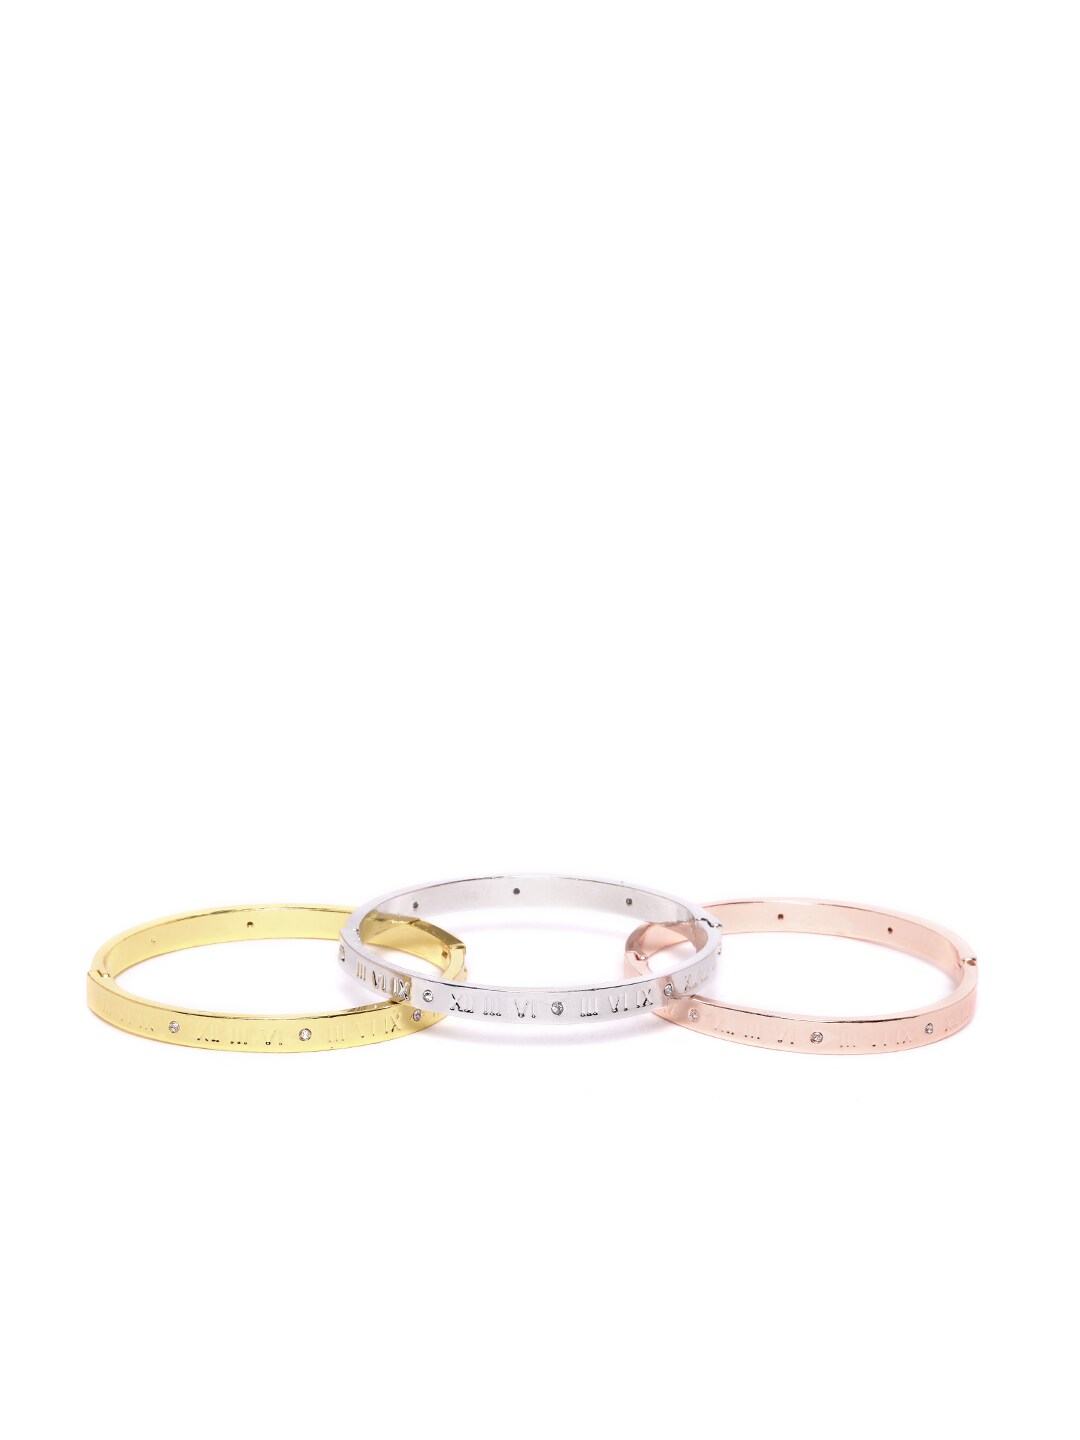 YouBella Set of 3 Gold-Plated Stone Studded Roman Numerals Inscribed Bangle Style Bracelet Price in India